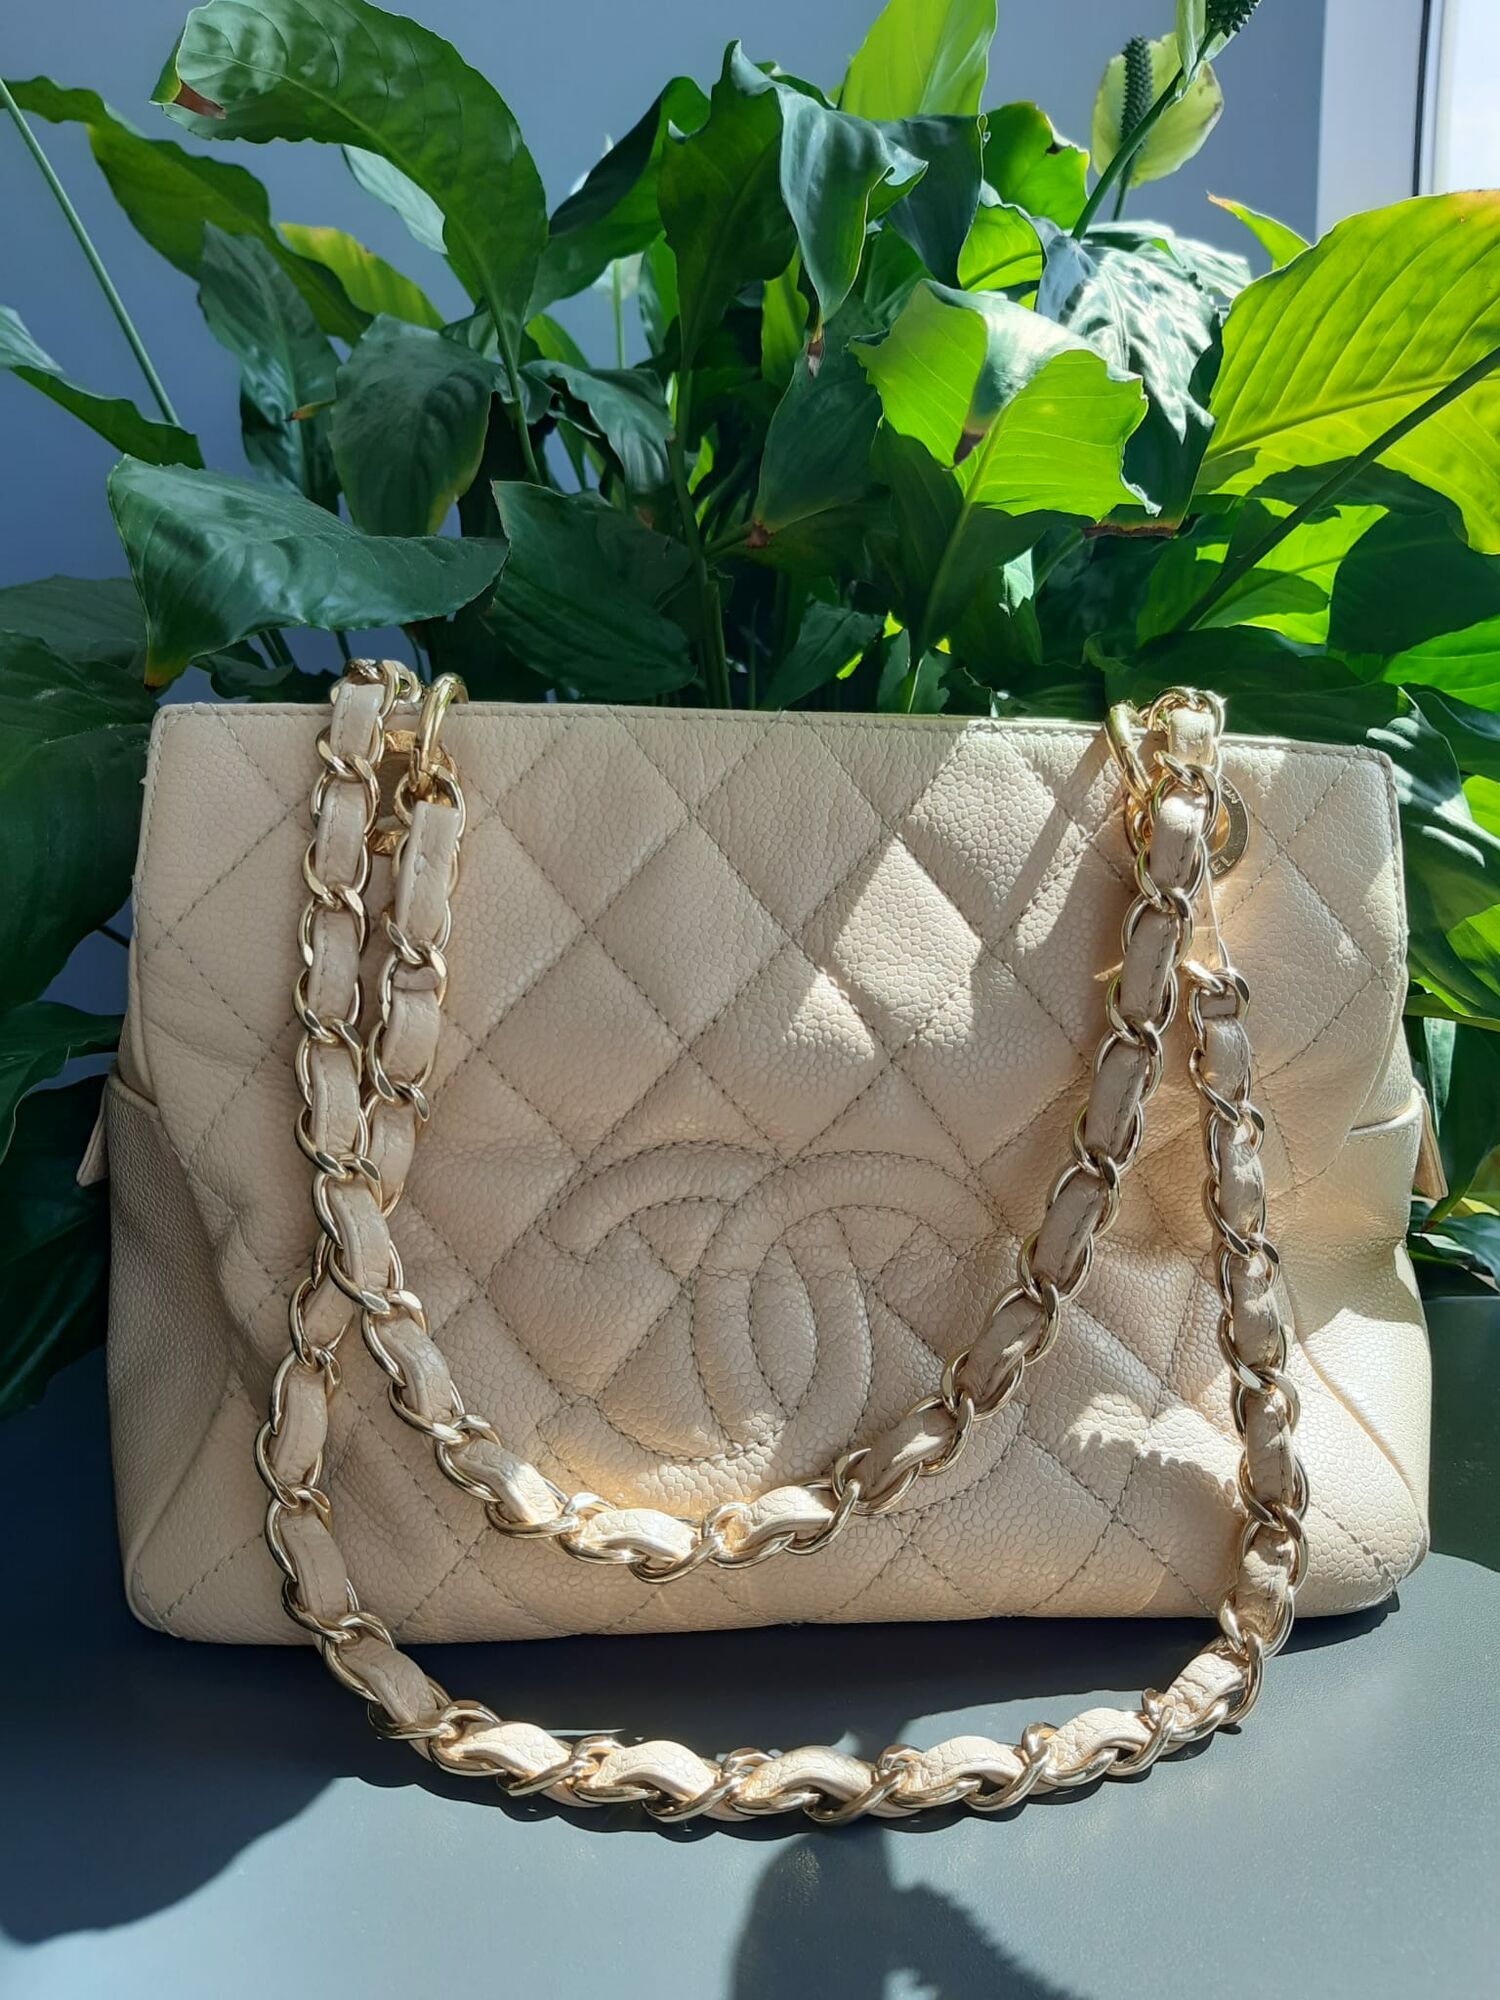 Petite Timeless Tote Bag Chanel, buy pre-owned at 2000 EUR